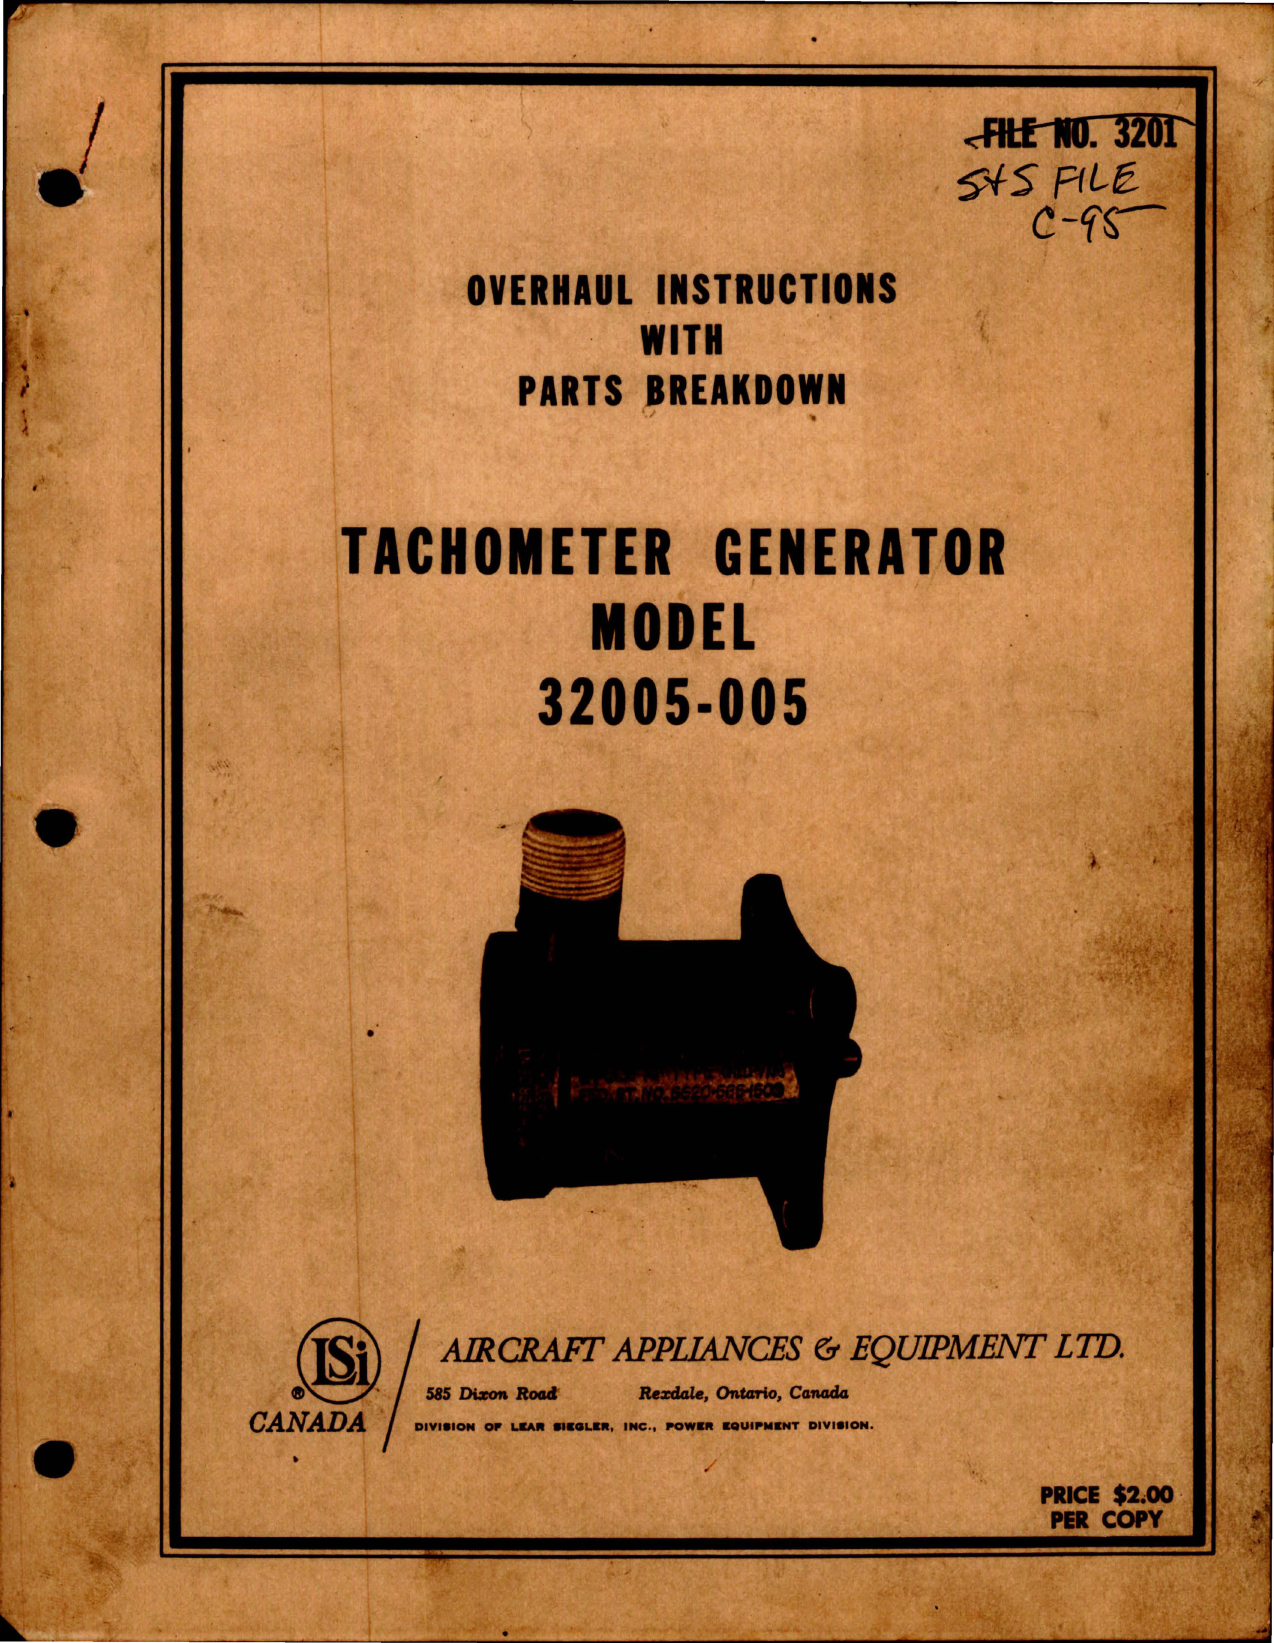 Sample page 1 from AirCorps Library document: Overhaul Instructions with Parts for Tachometer Generator - Model 32005-005